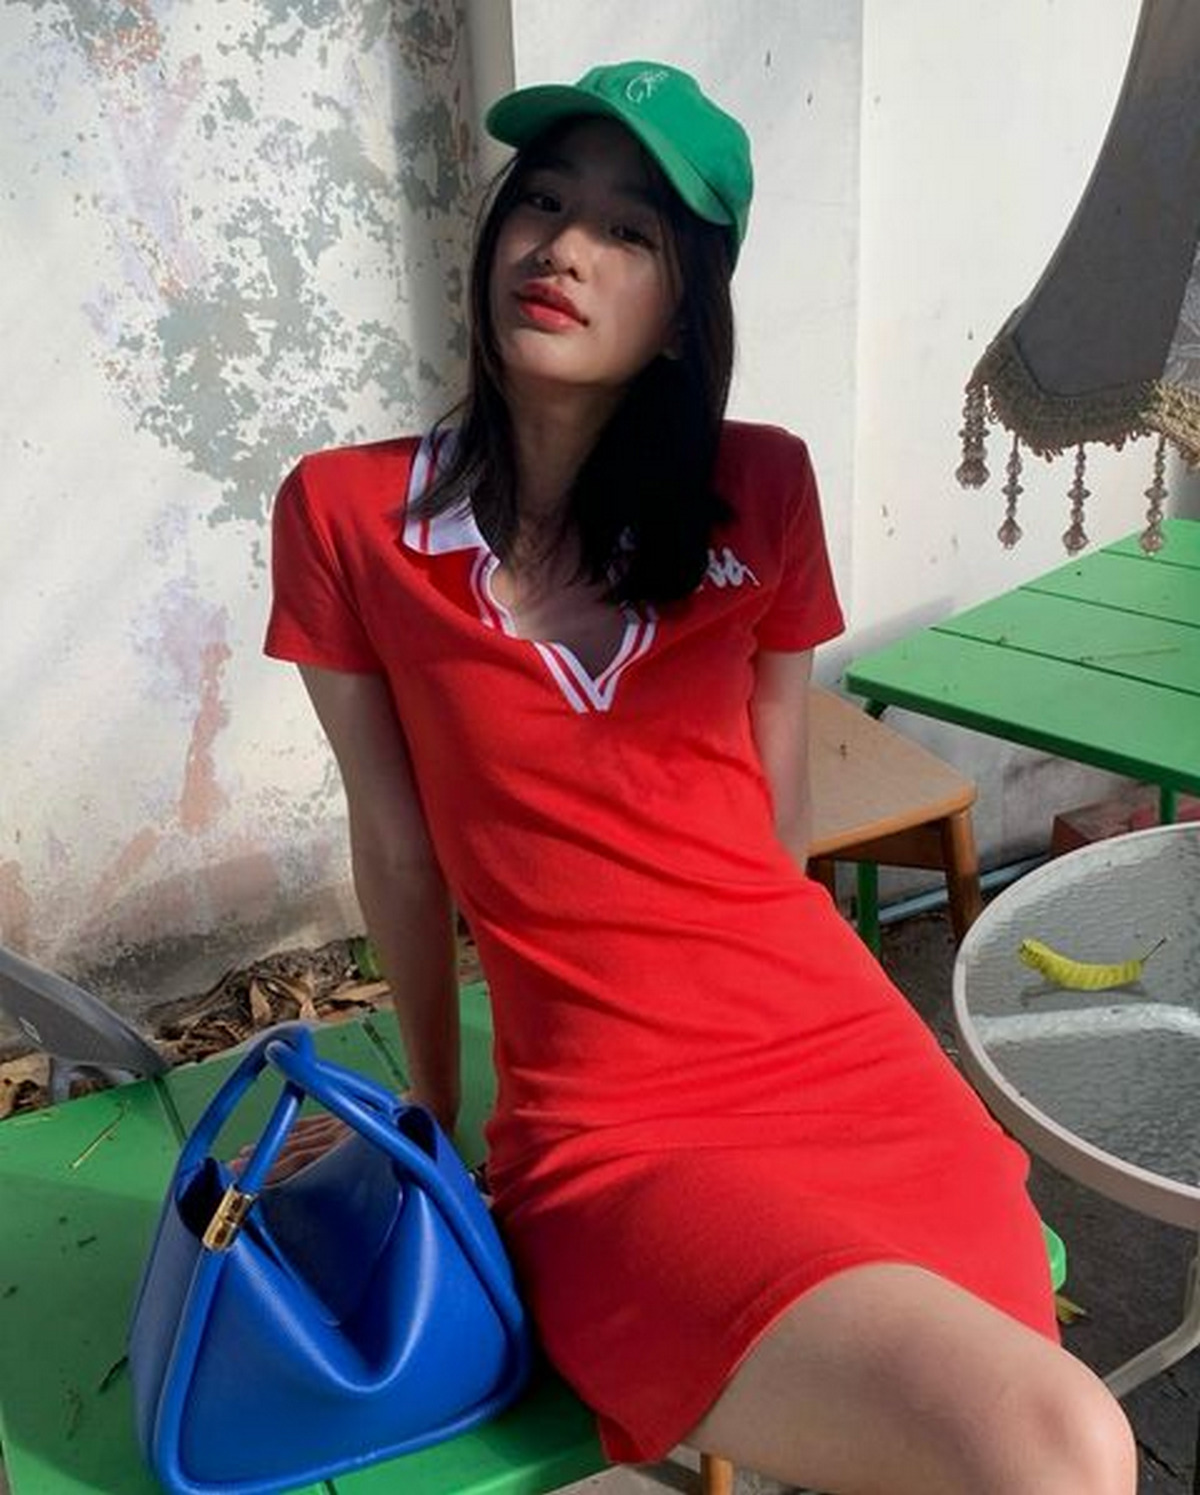 Red Sporty Dress With Green Cap And Blue Handbag